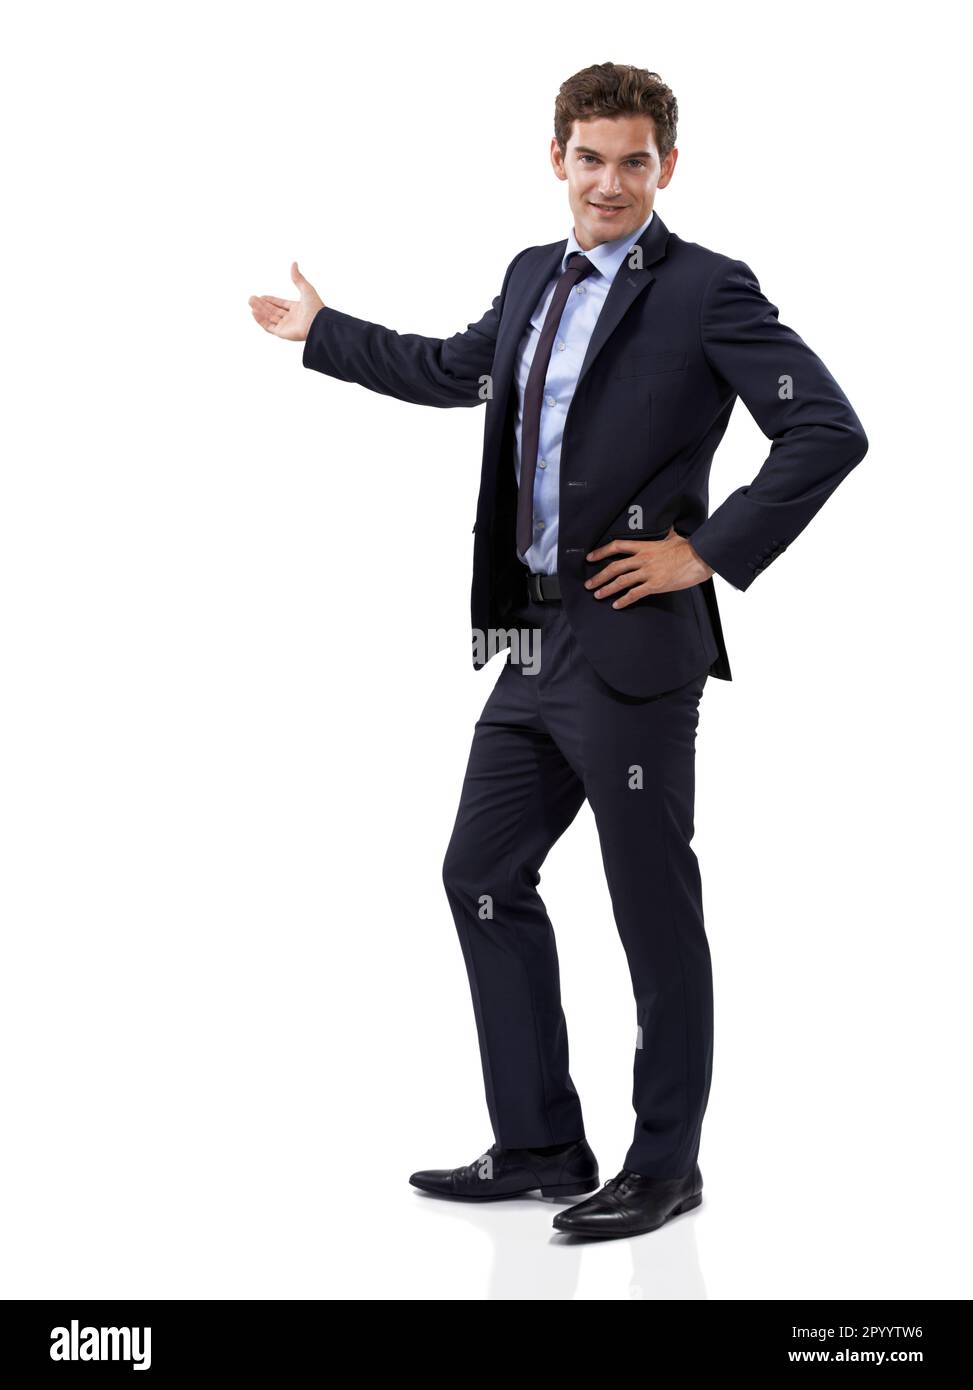 Introducing the brand youve all been waiting for. Studio shot of a well dressed businessman showing you copyspace against a white background. Stock Photo